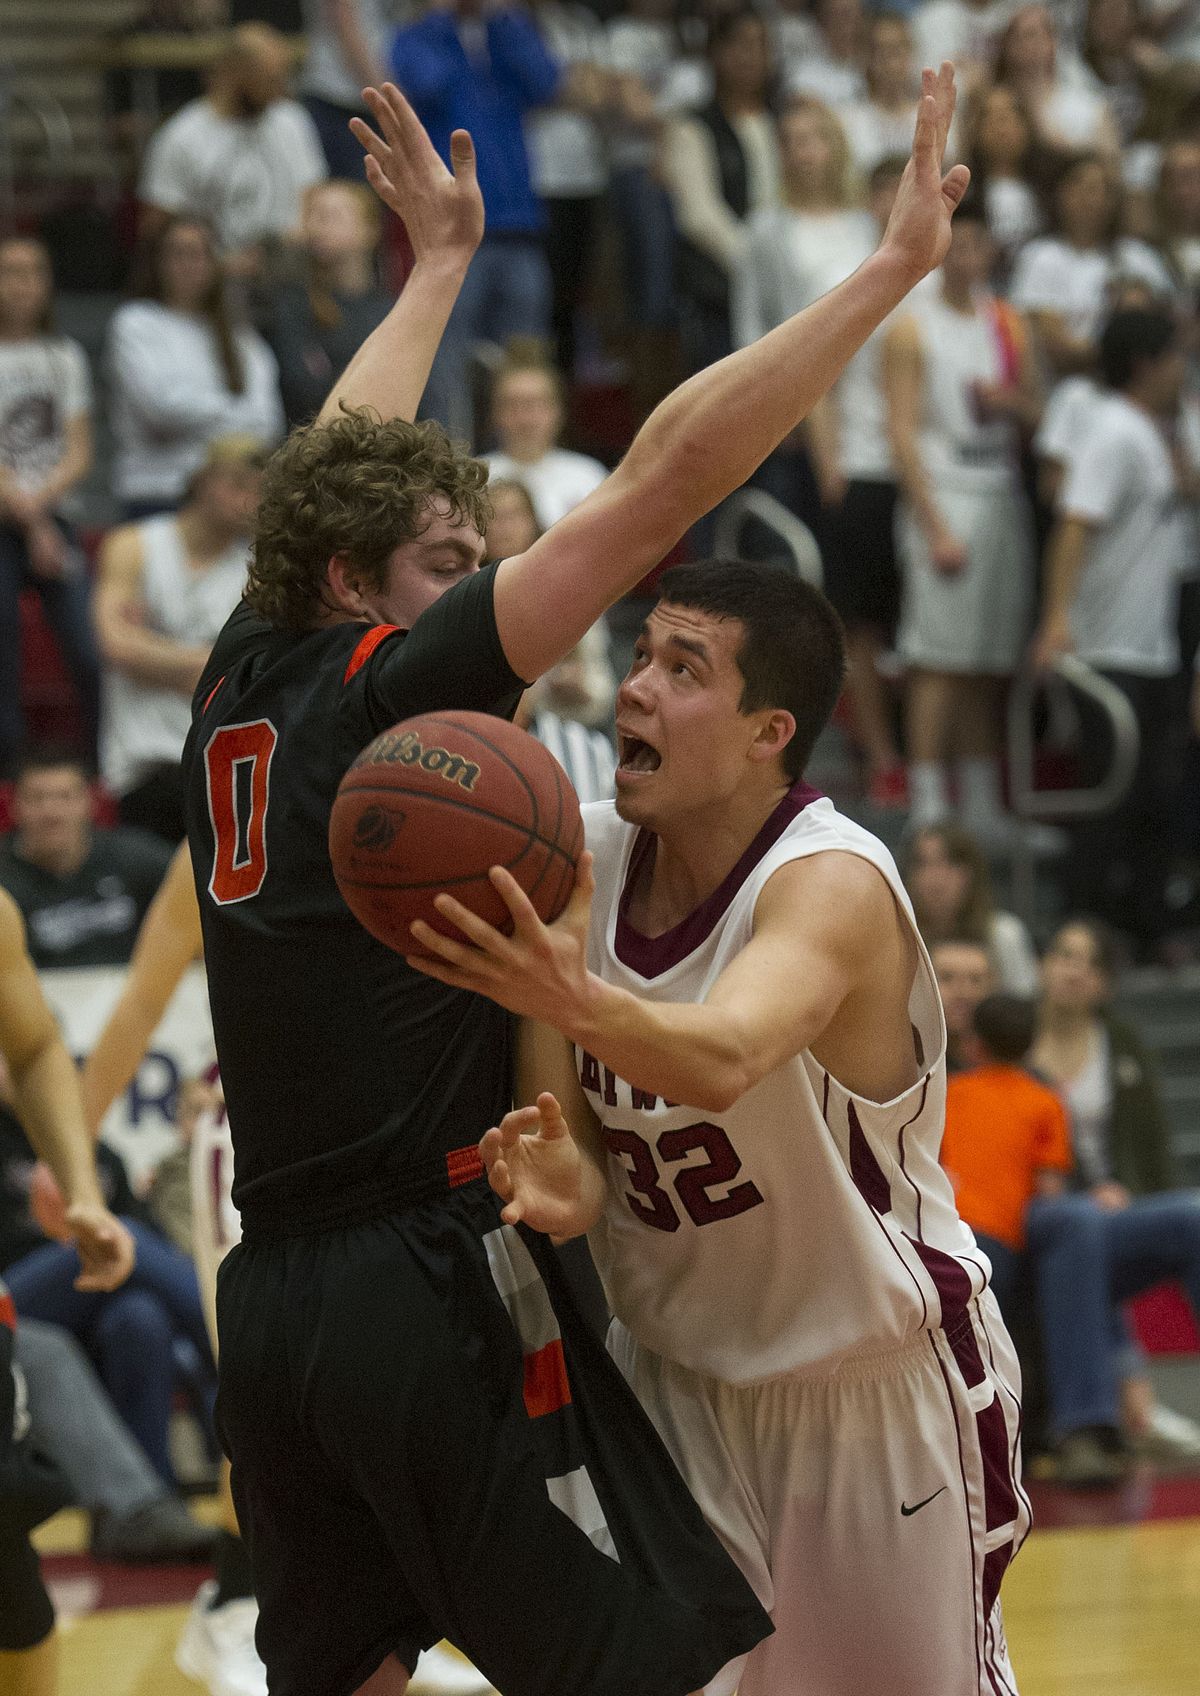 Whitworth’s George Valle, who had a key steal and layup in the early going, shoots underhand against the Pioneers’ defense. (Colin Mulvany)